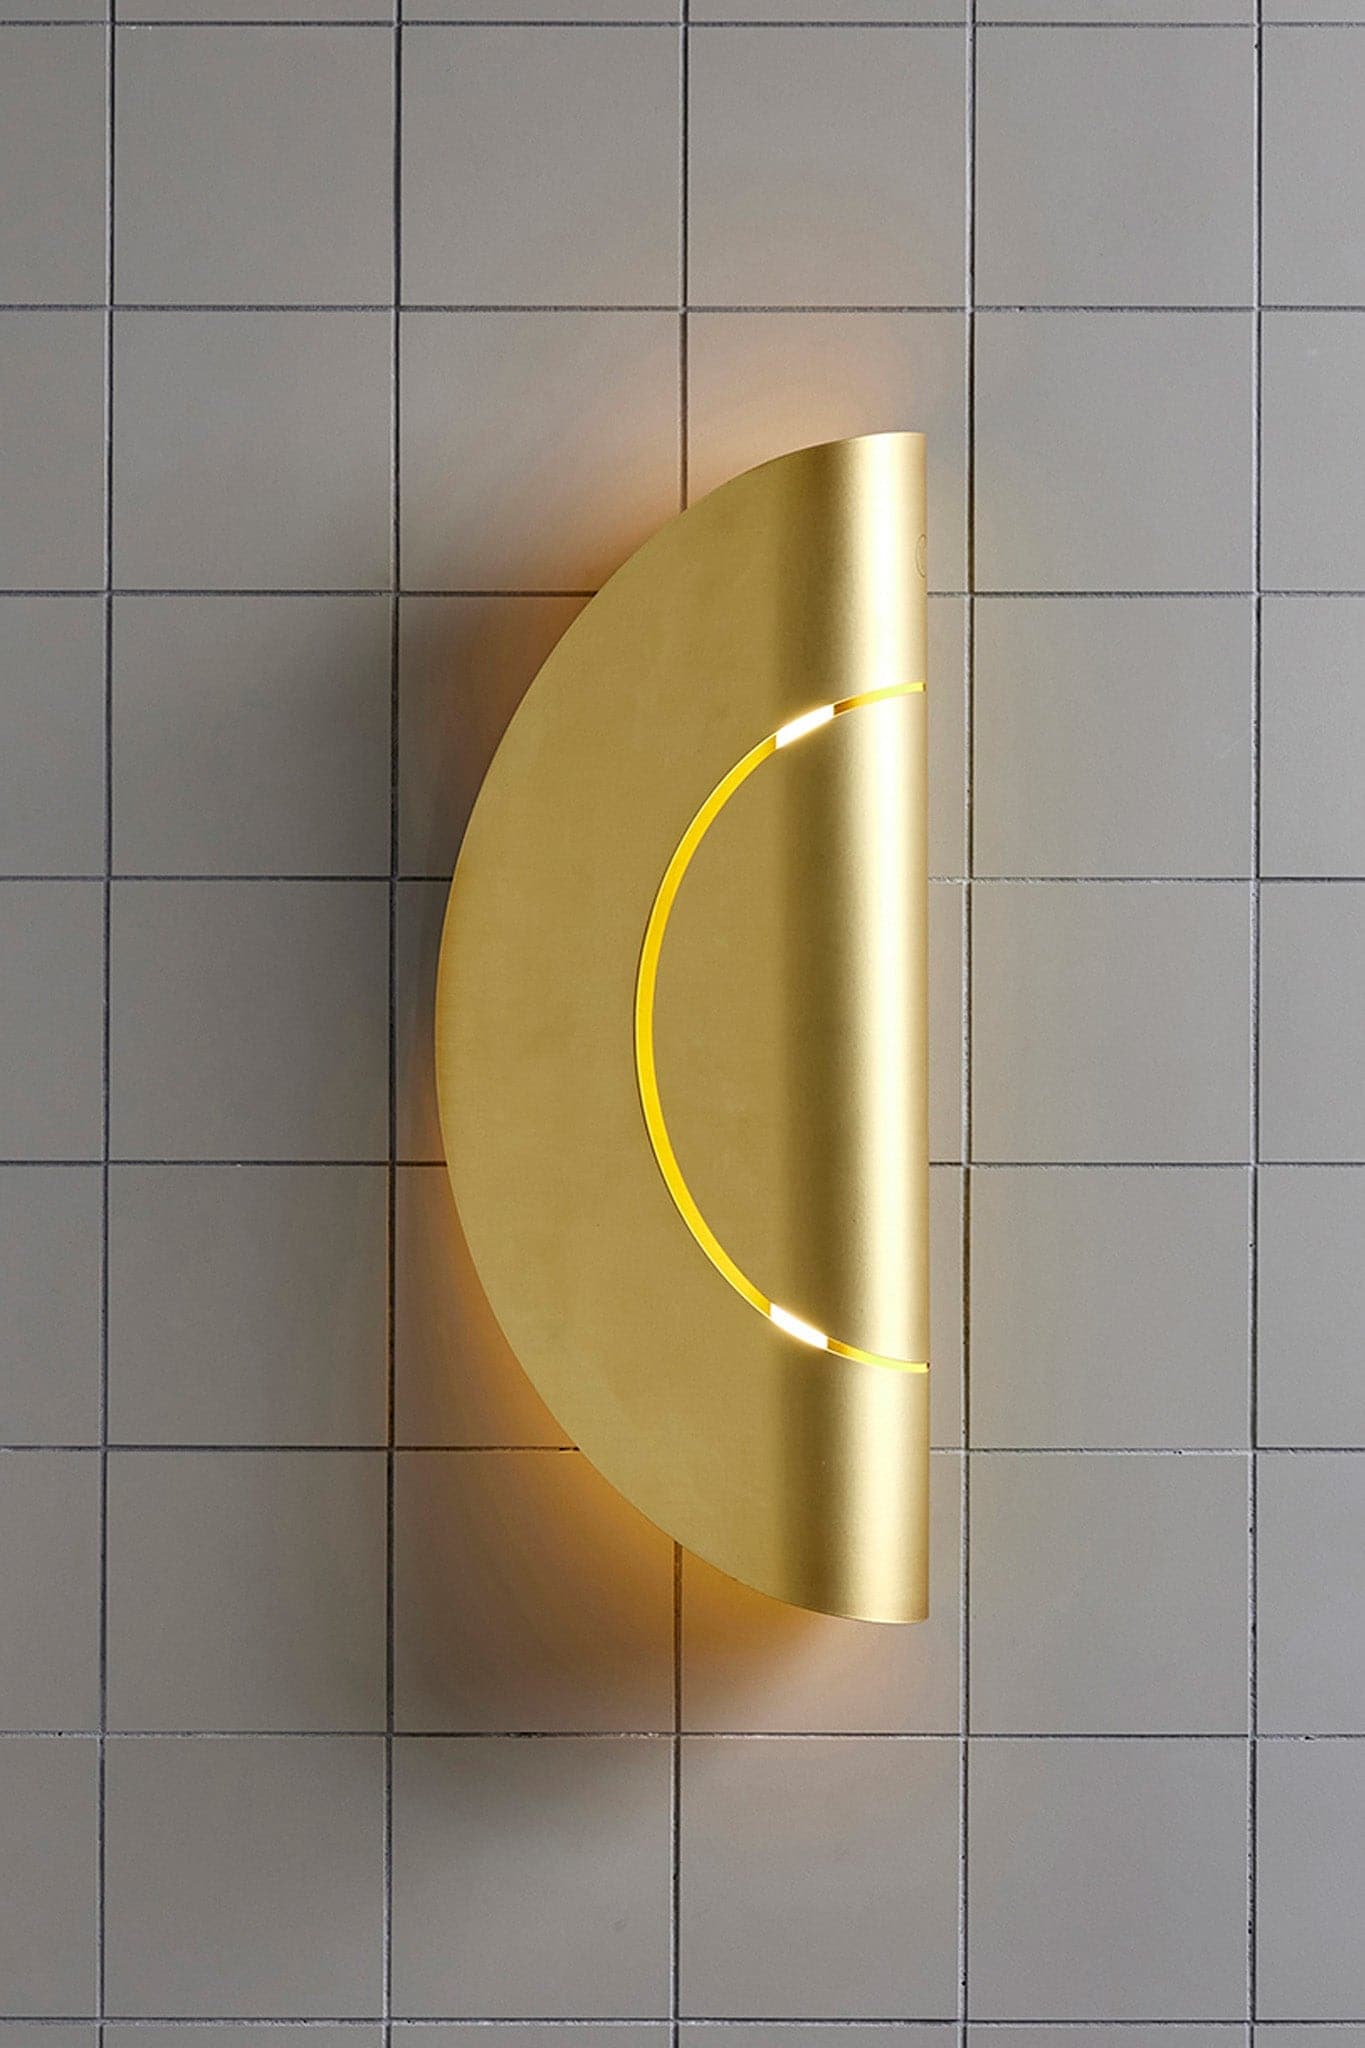 Marz Designs Feature Lighting - Furl Circle Wall Light in Powder Coated Brass with the light on.